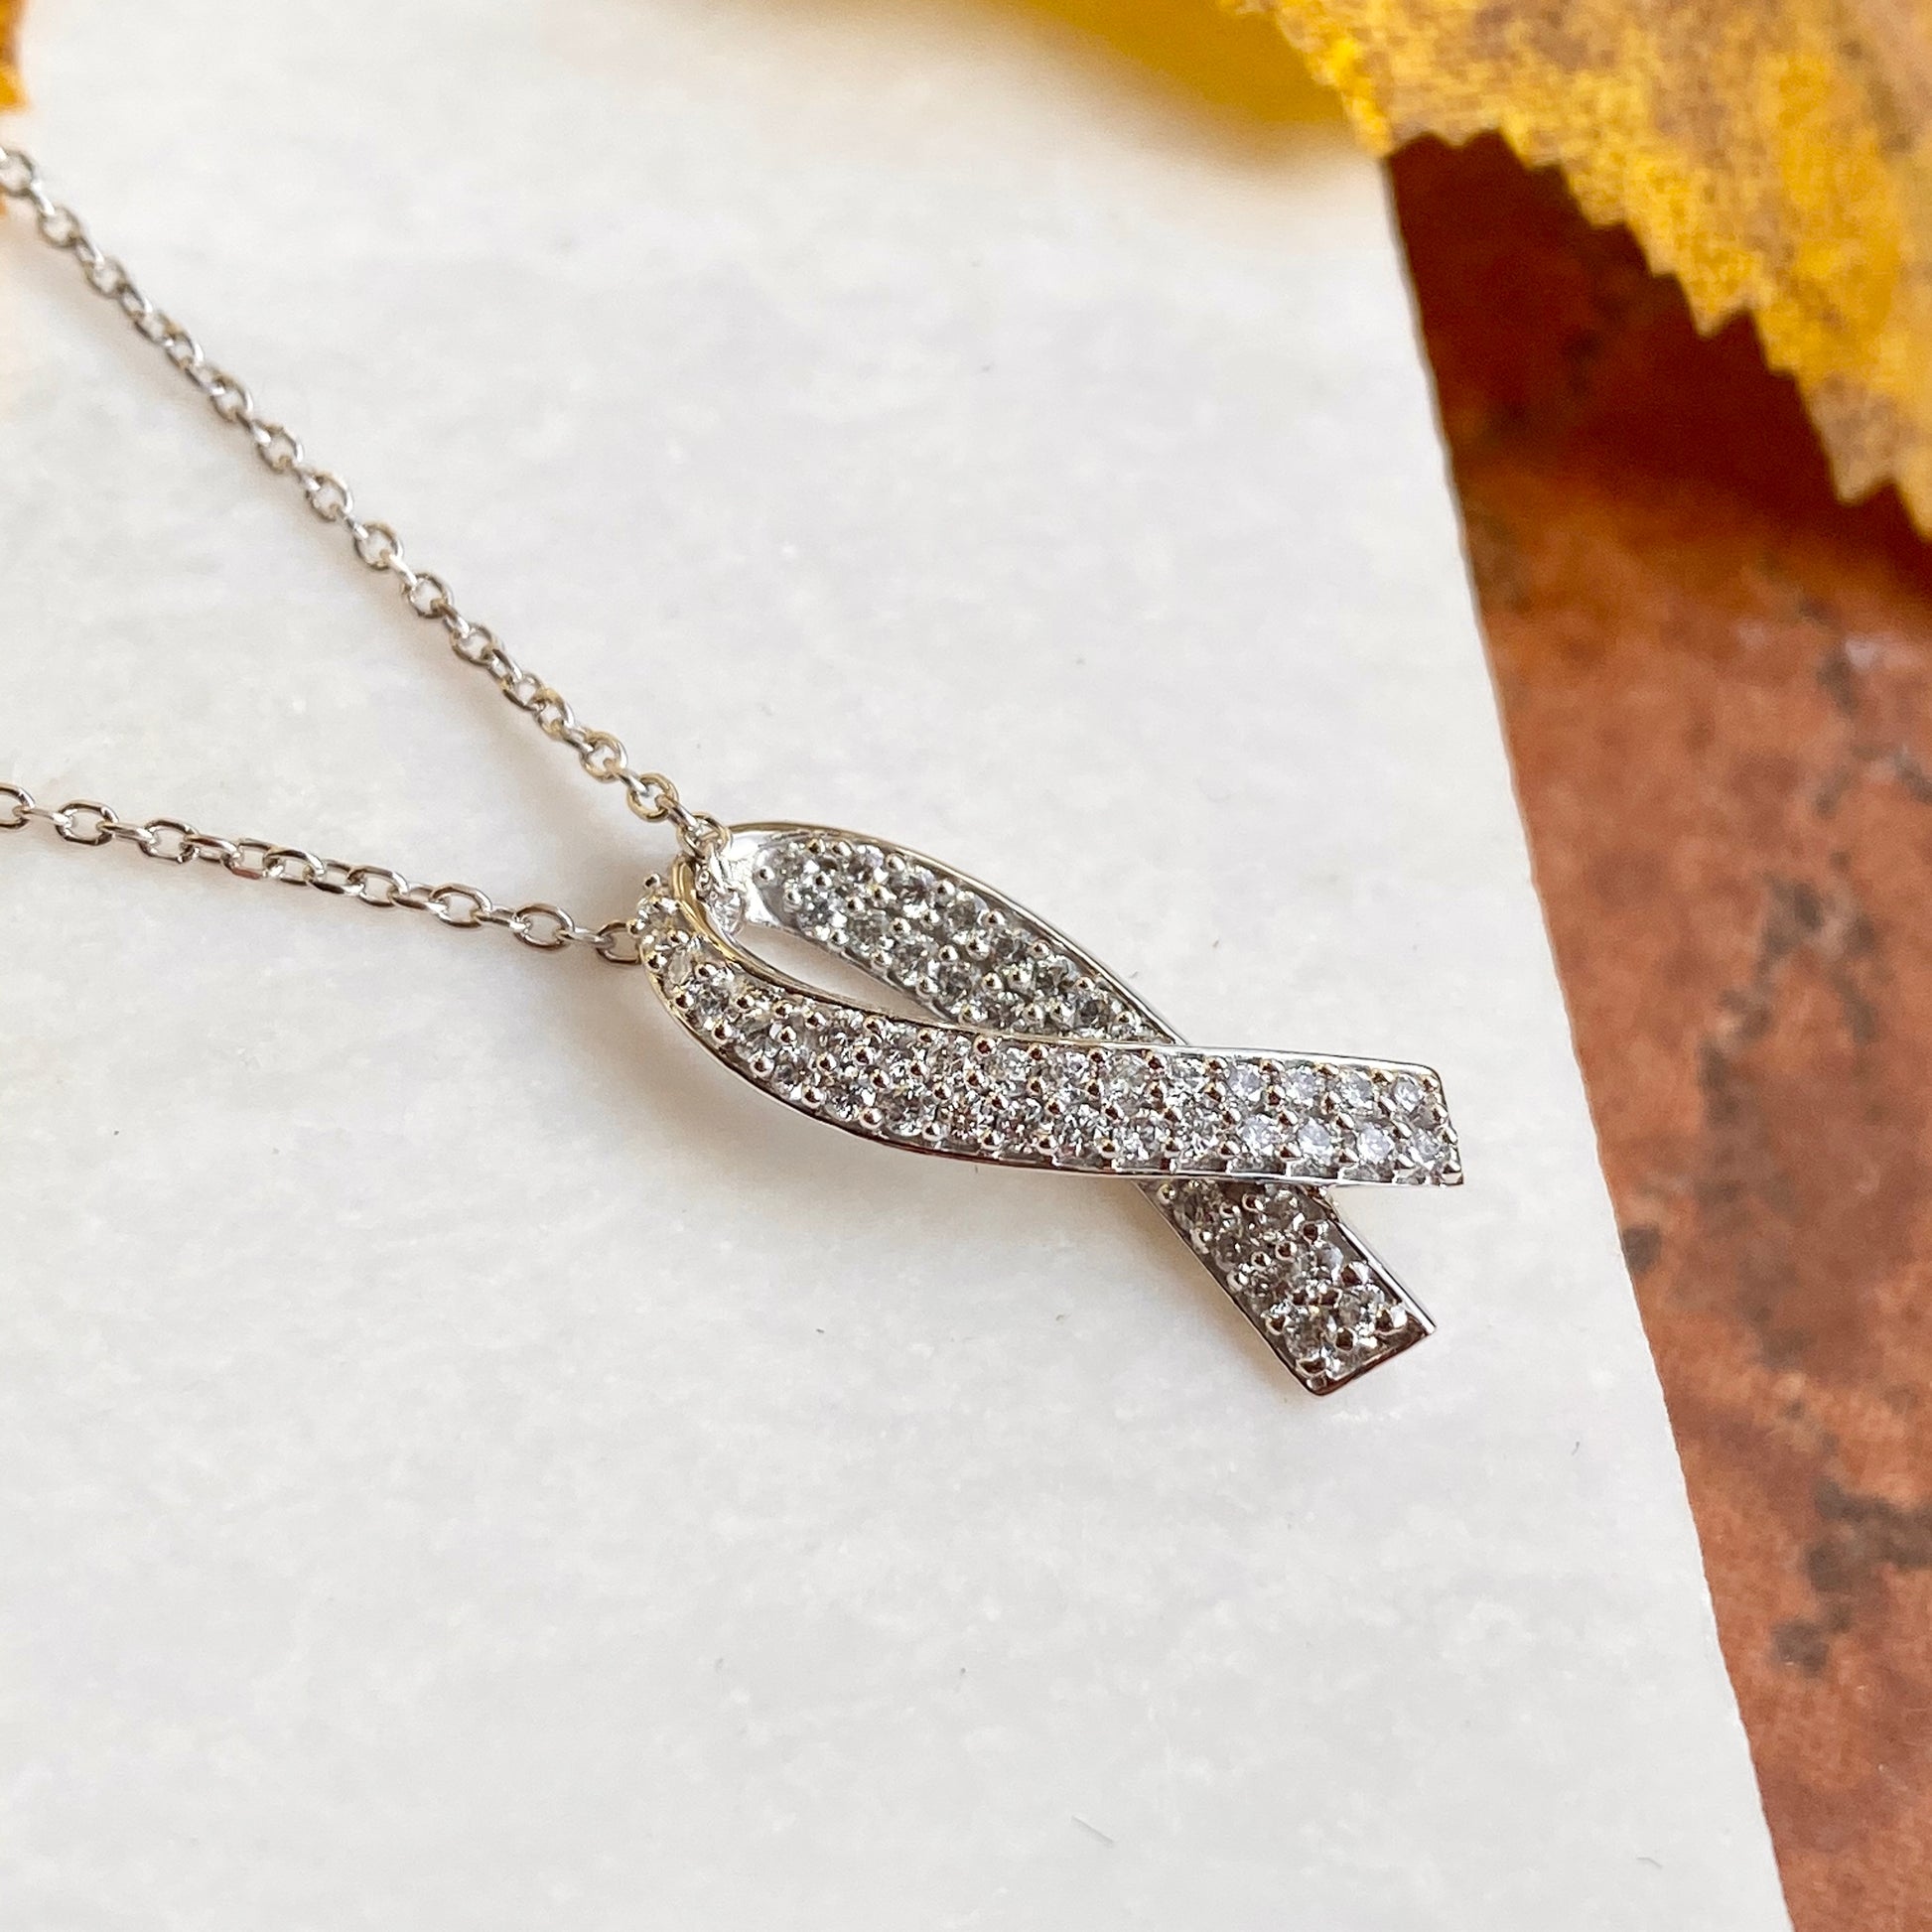 14KT White Gold Pave Diamond Breast Cancer Awareness Ribbon Pendant Necklace, 14KT White Gold Pave Diamond Breast Cancer Awareness Ribbon Pendant Necklace - Legacy Saint Jewelry